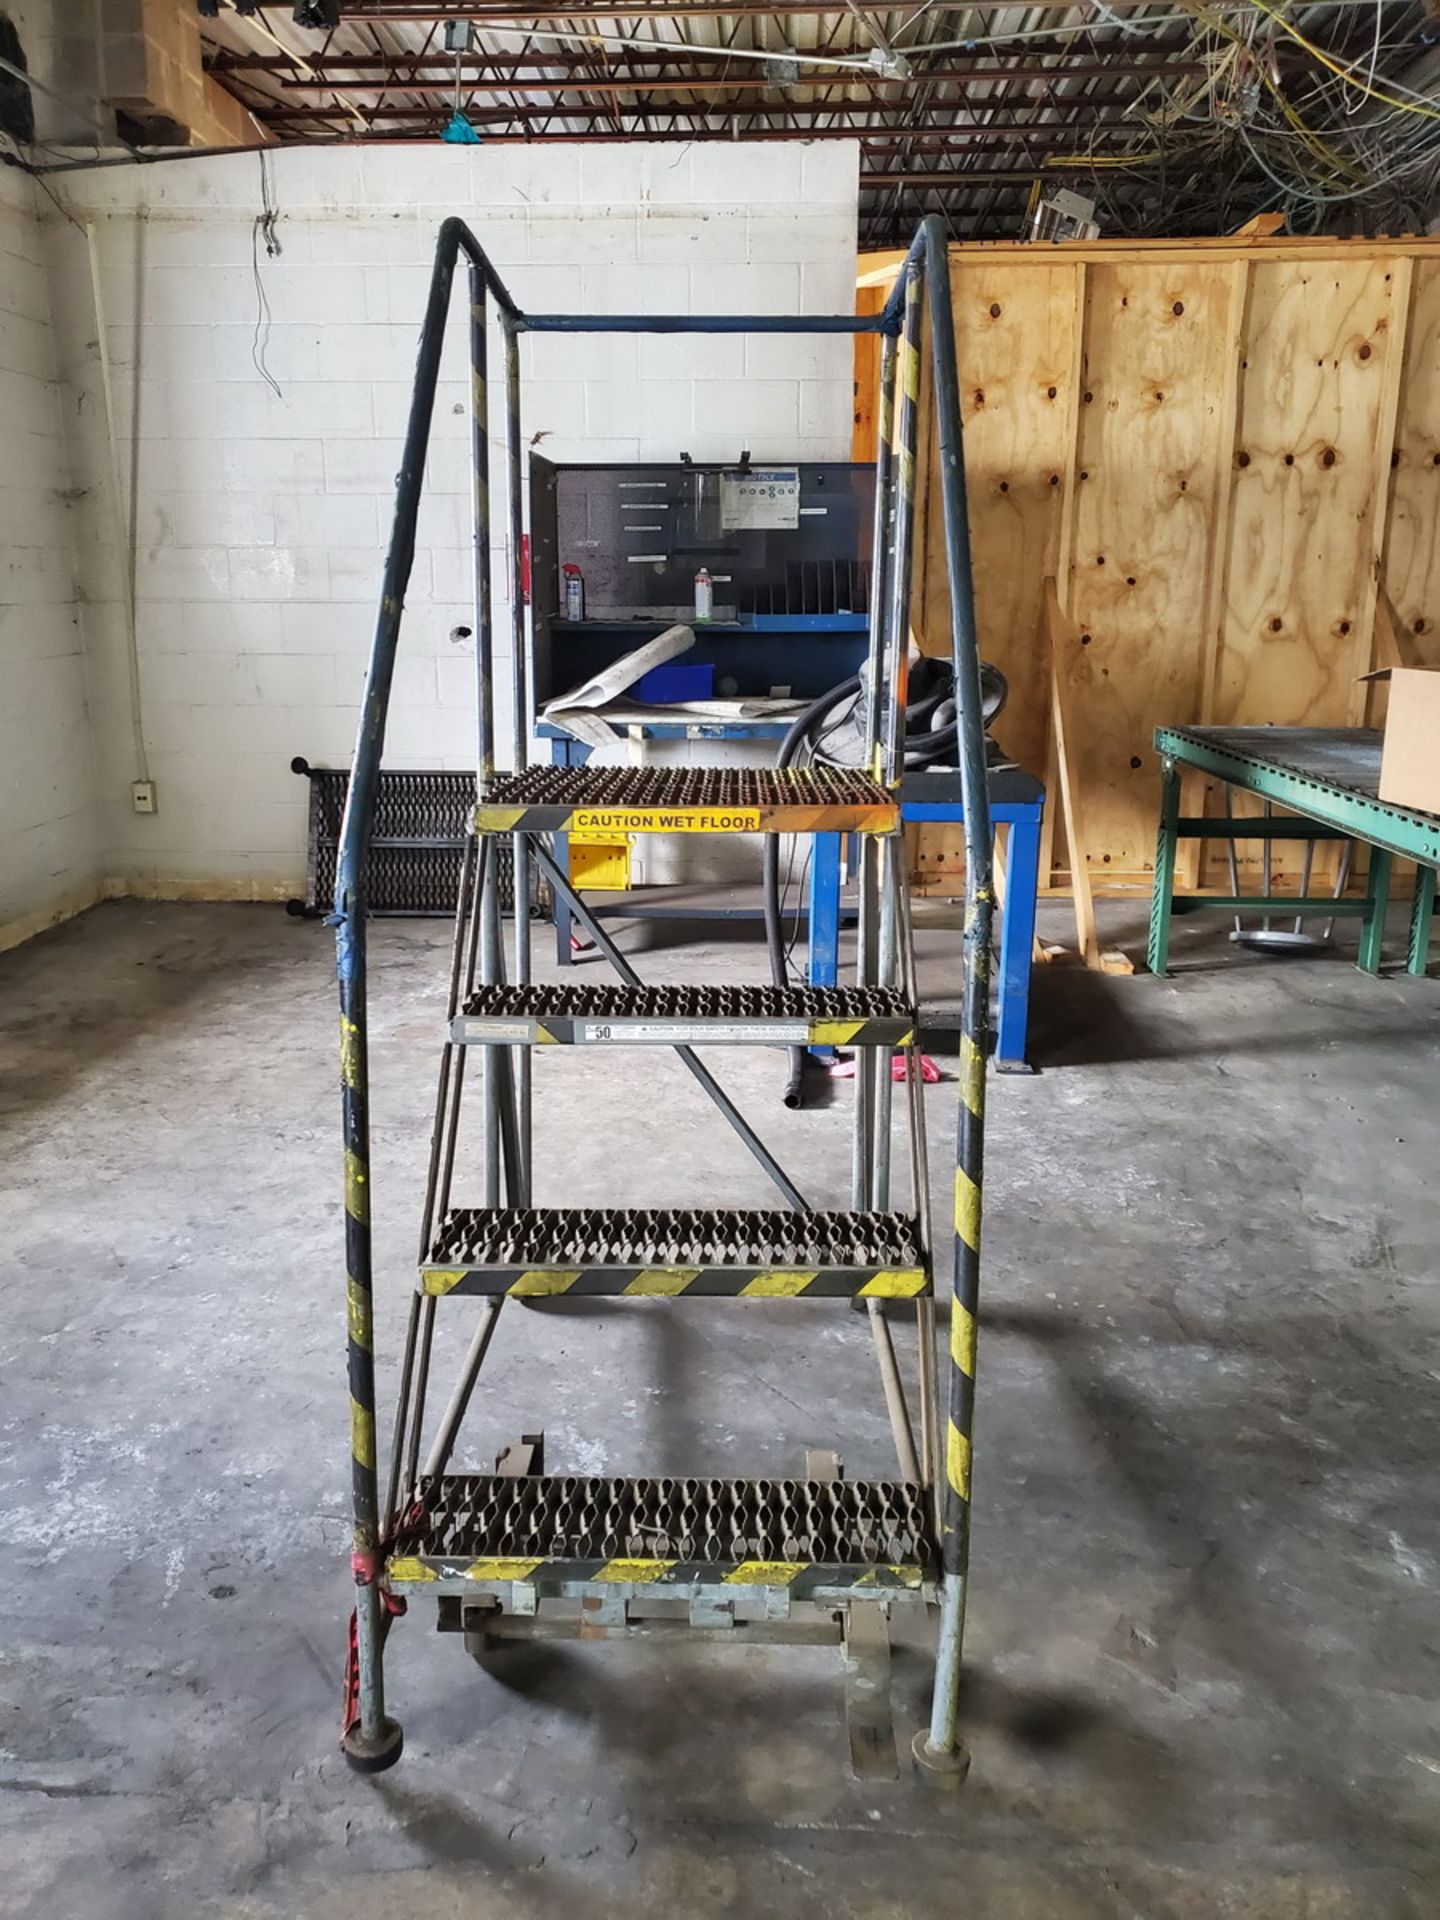 Cotterman 3-Step Rolling Platform Staircase 800lbs Cap. - Image 2 of 3